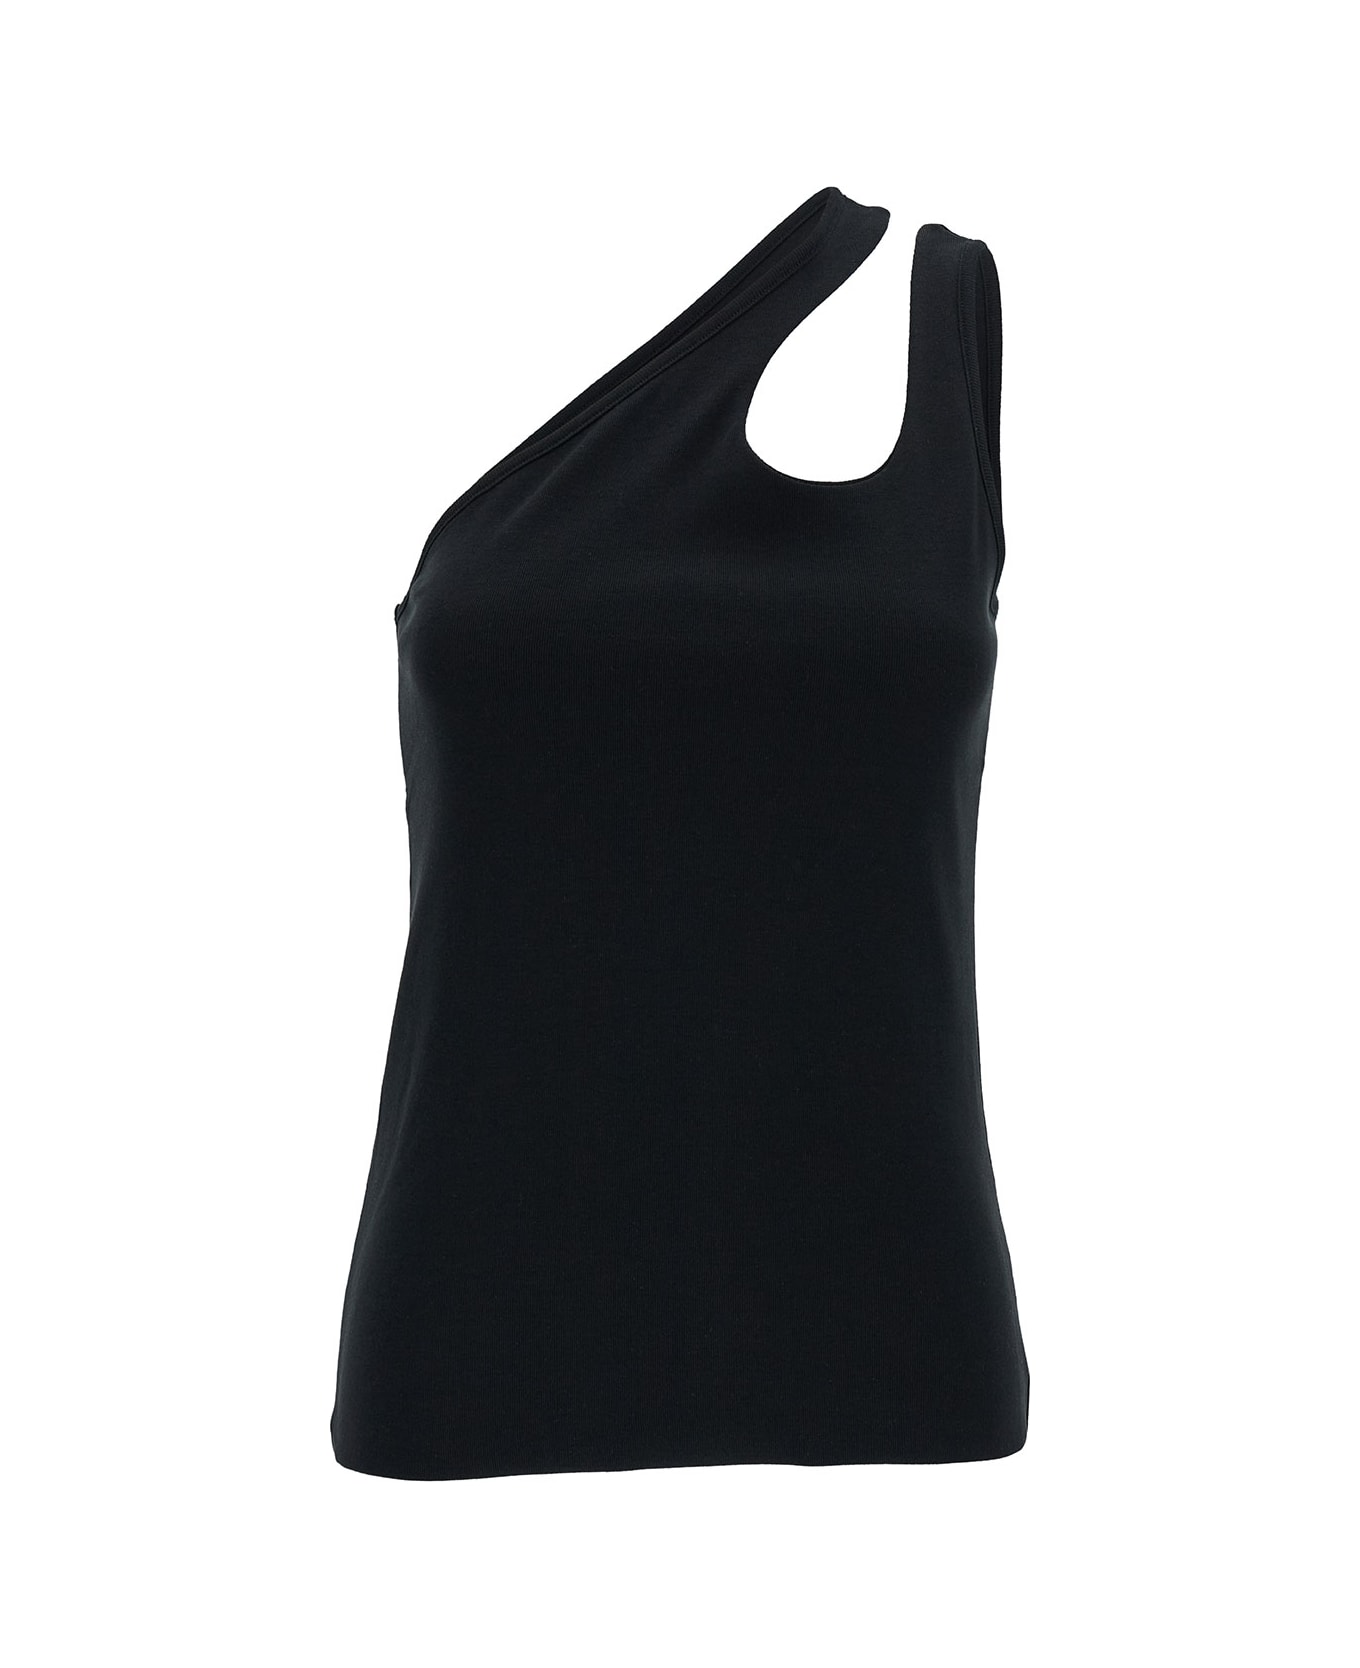 Federica Tosi Black One-shoulder Top With Cut-out In Ribbed Cotton Woman - Black